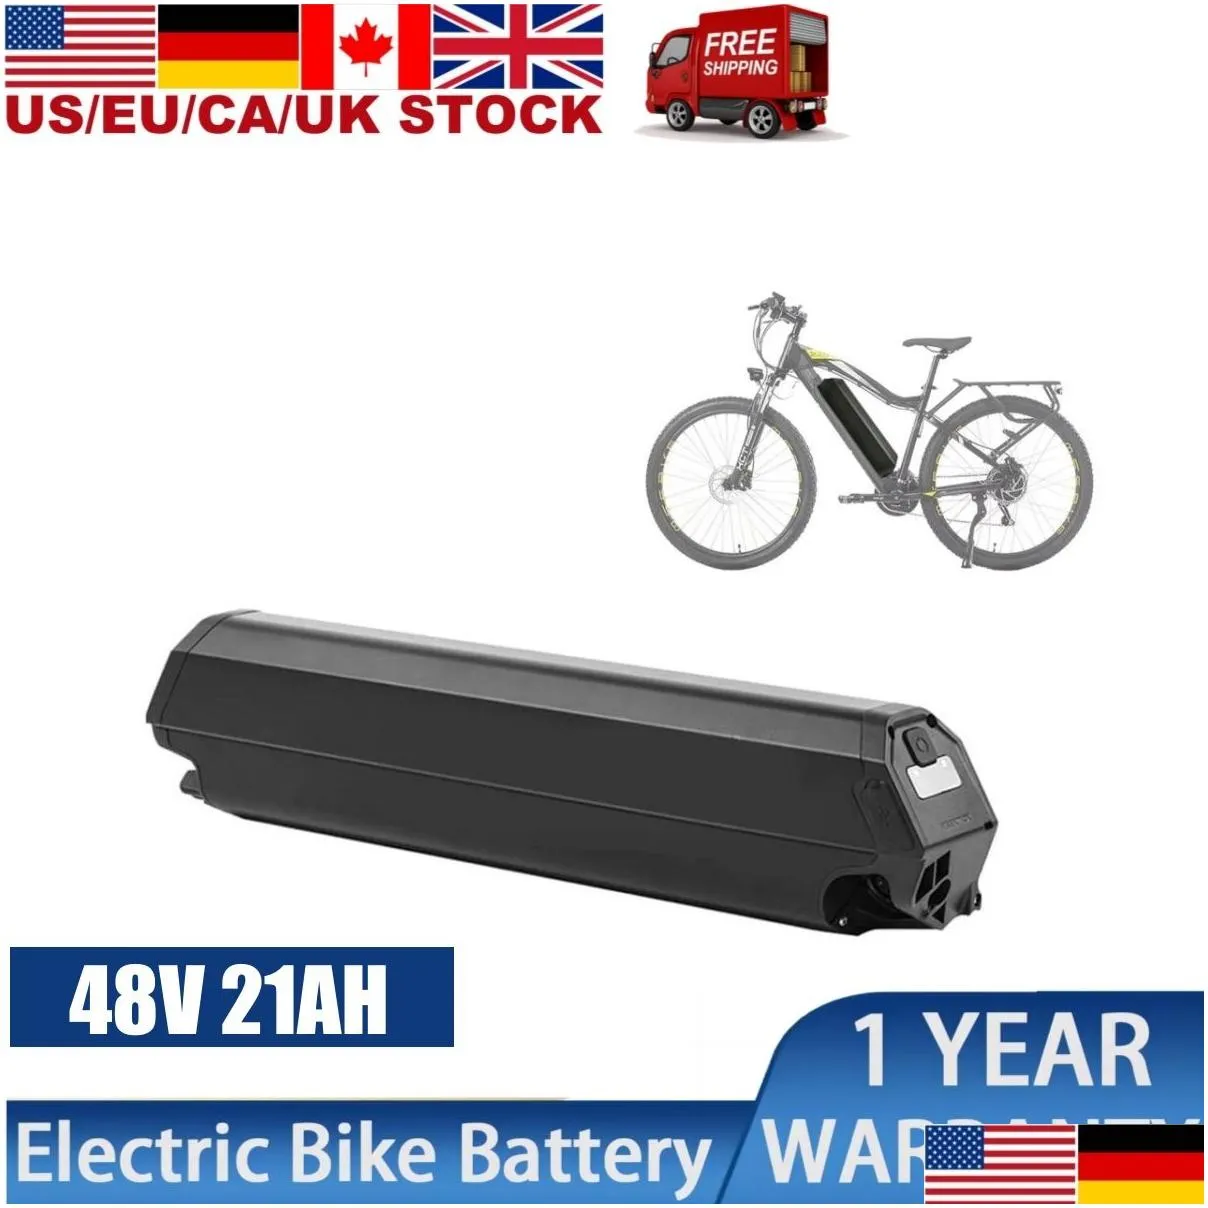 reention dorado max e-bike battery 48 v 21ah ebike batteries for 1000w 750w 500w electric bicycle integrated tube batteria 48v 17.5ah ncm moscow electric bike